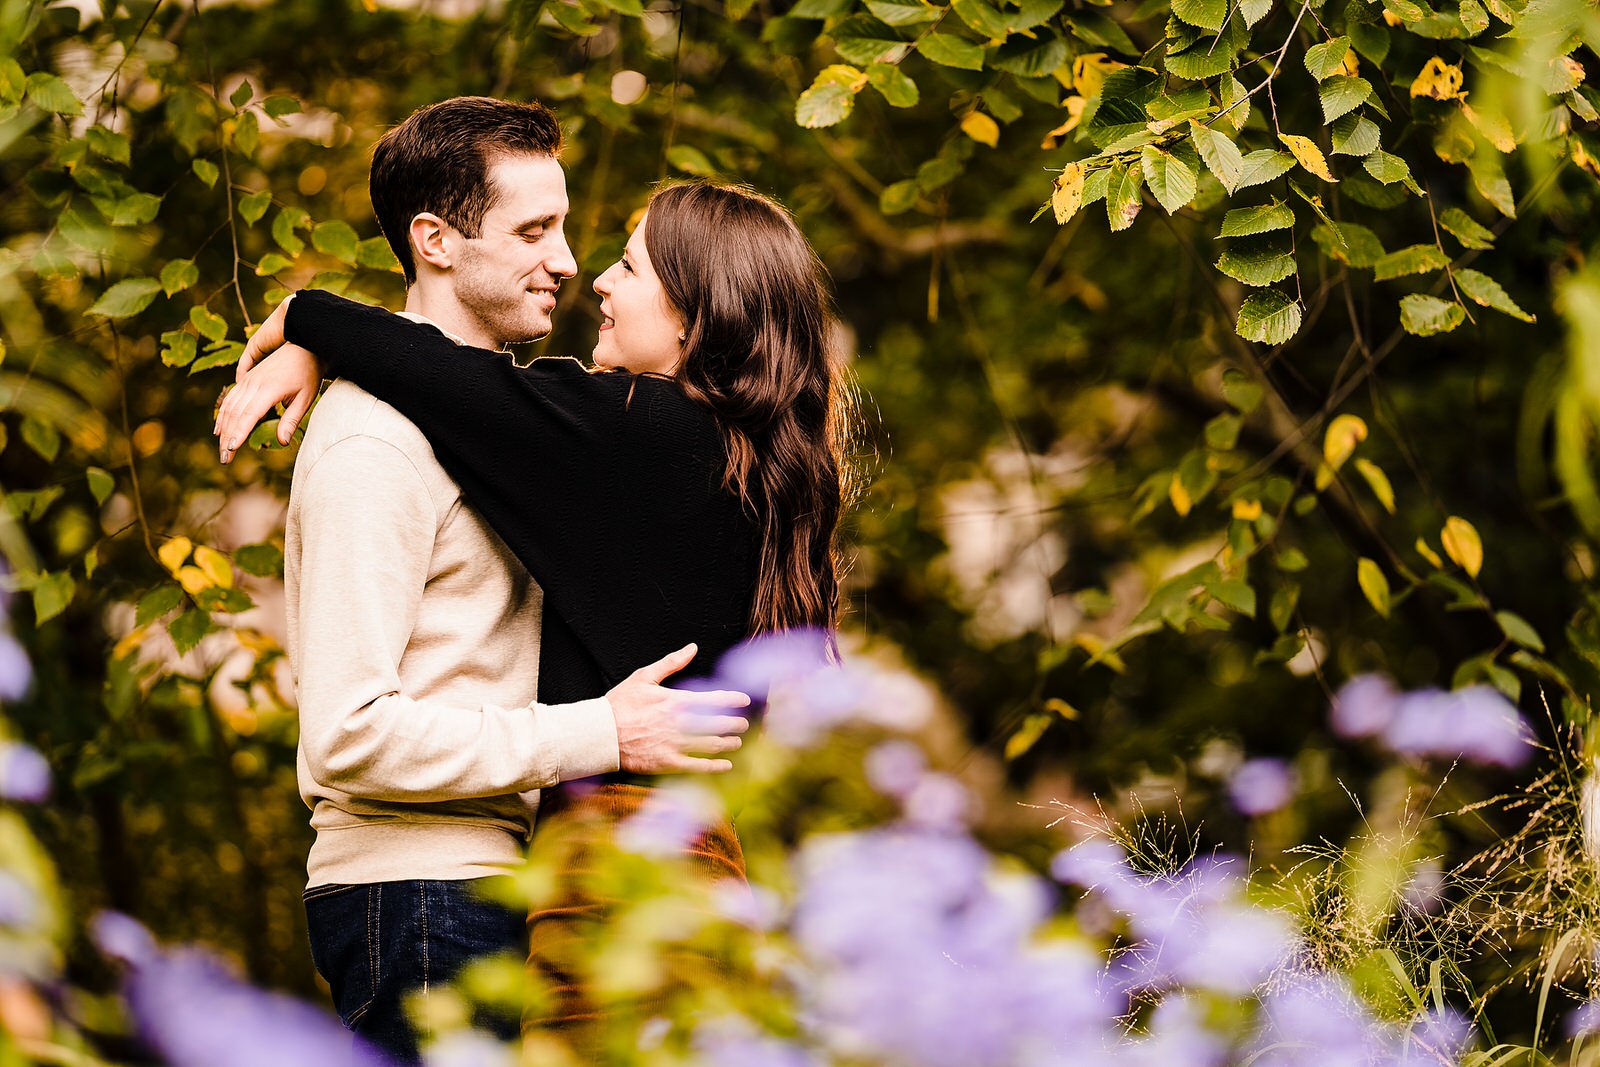 Coker arboretum is a beautiful location for Chapel Hill engagement photos